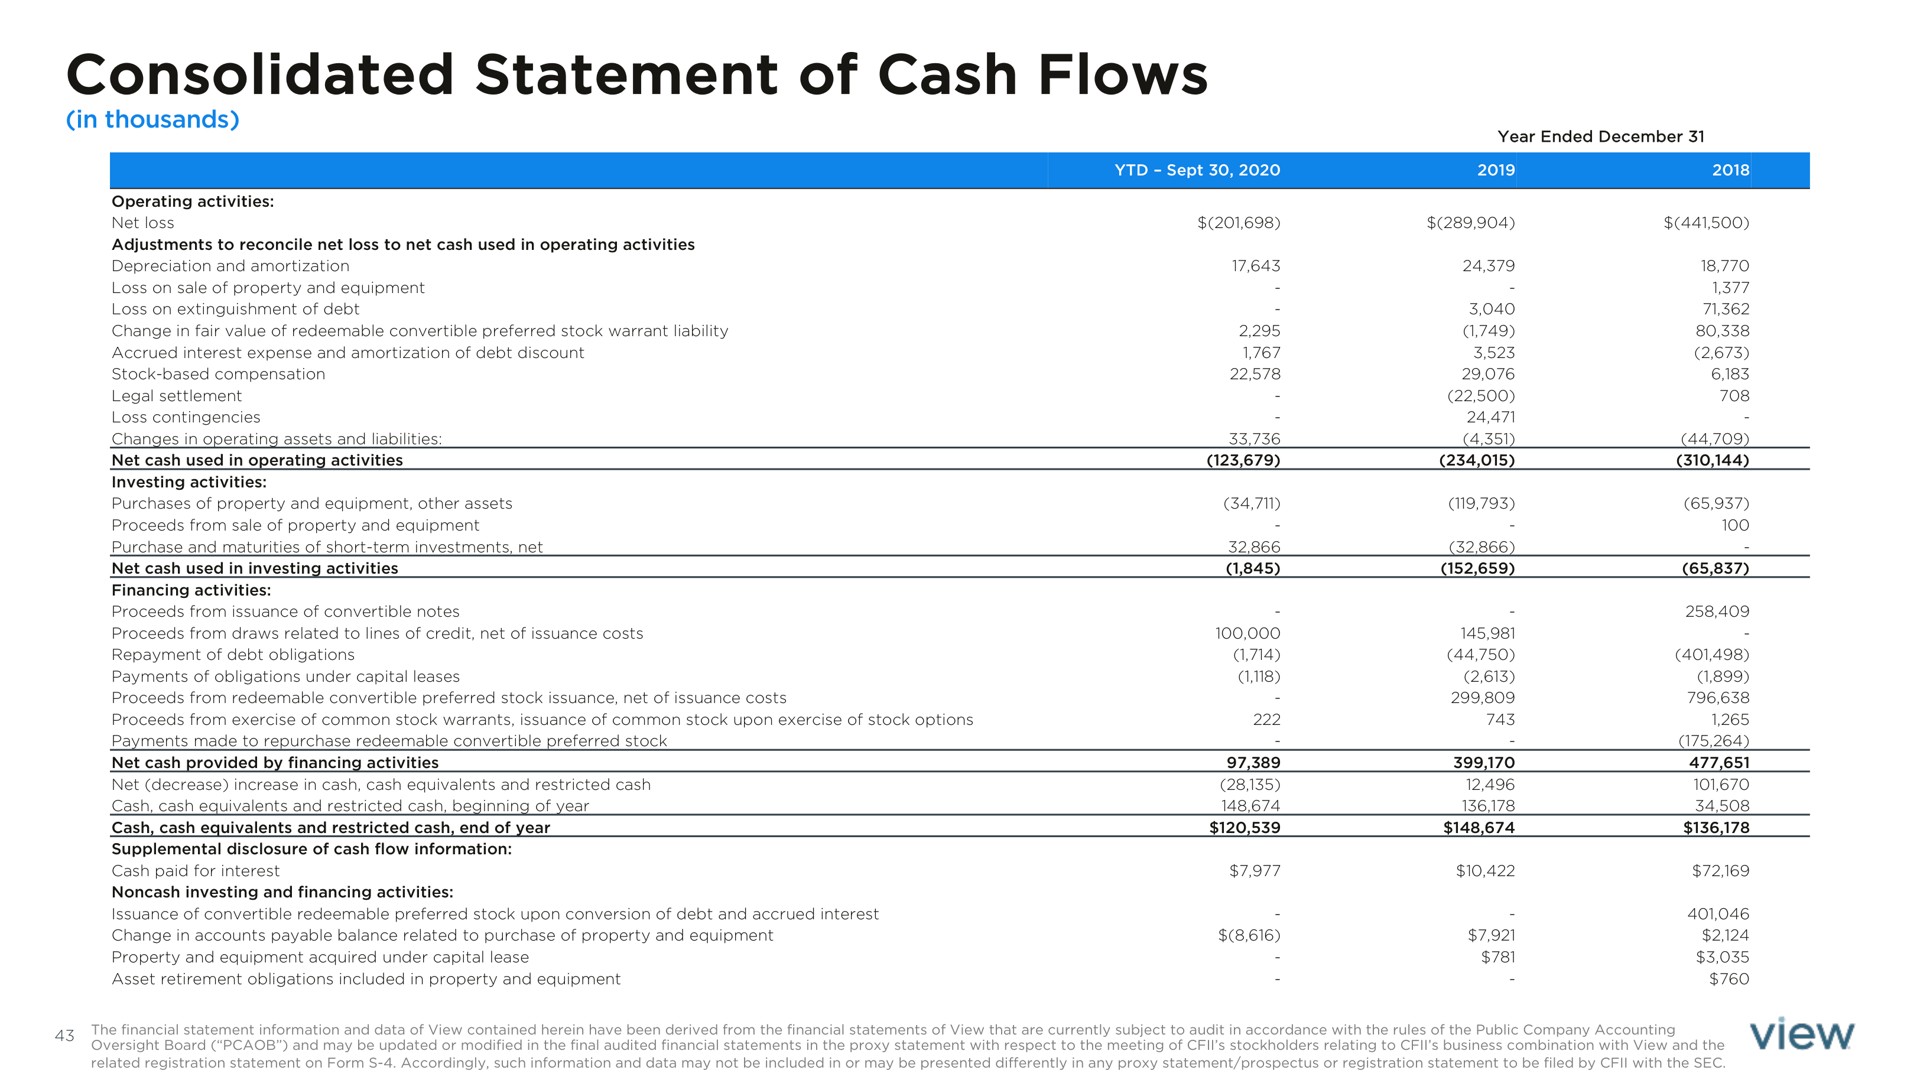 consolidated statement of cash flows | View